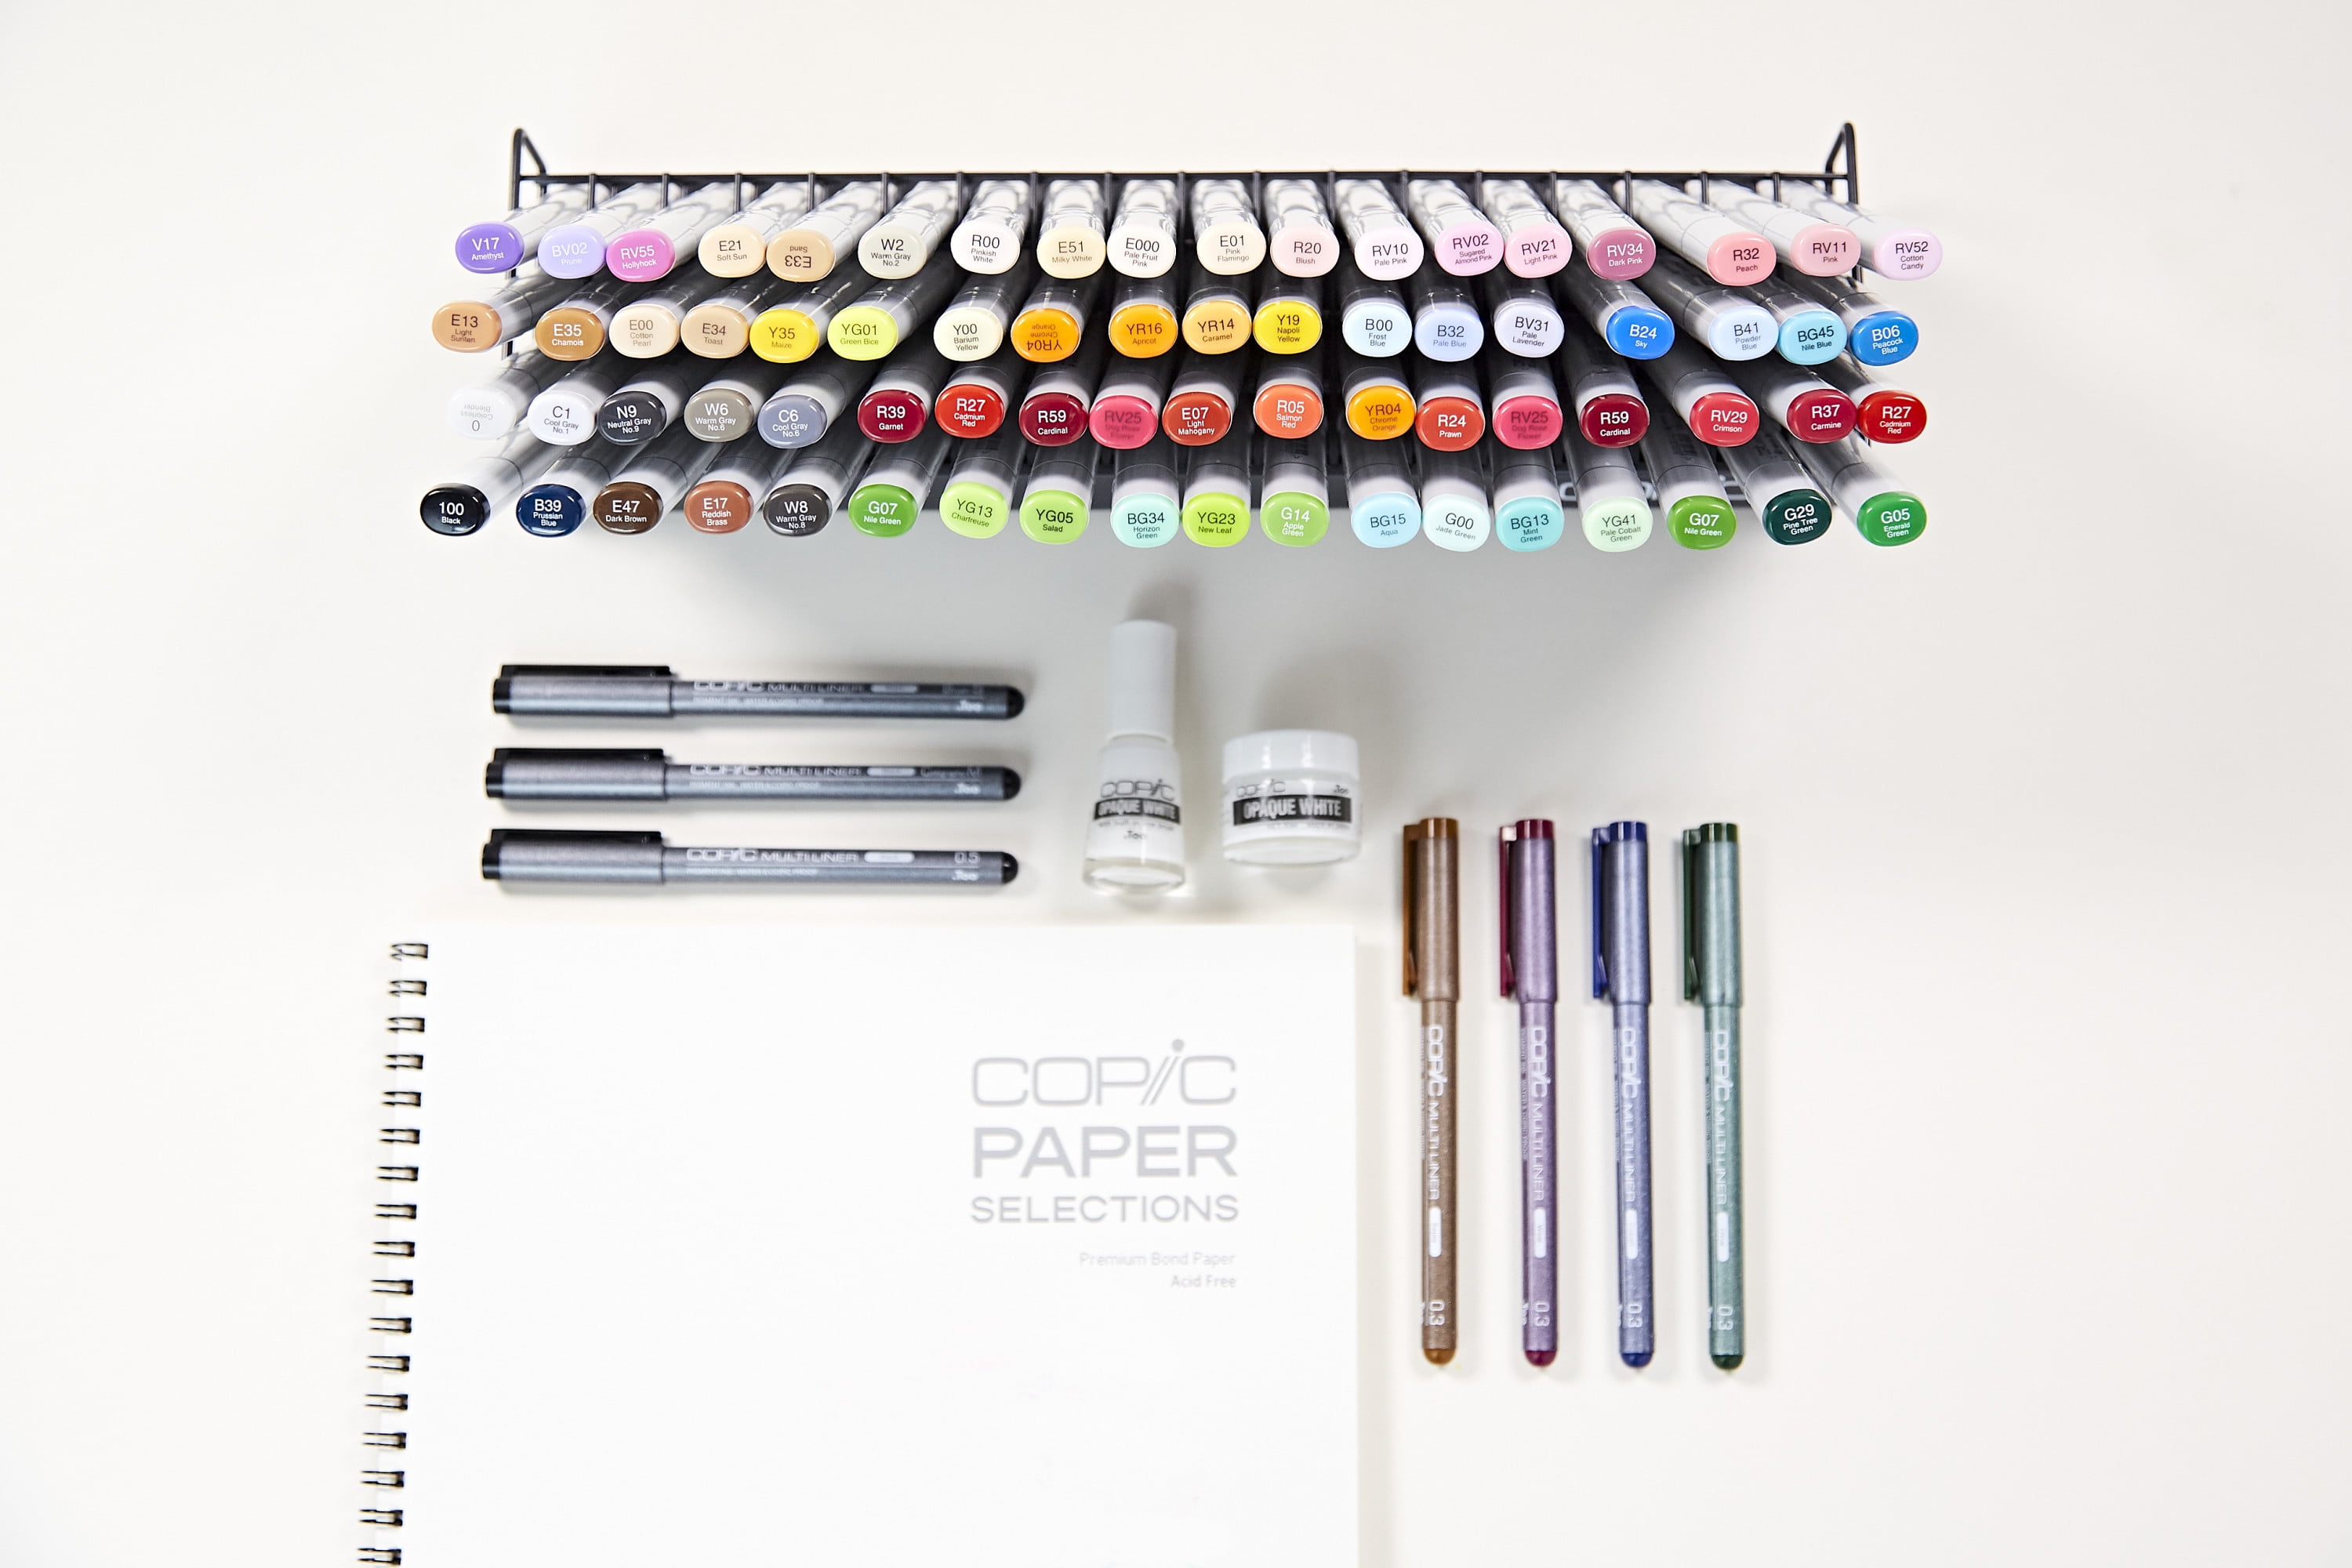 BUY Copic Sketchbook Wirebound Large 9x12 30sh